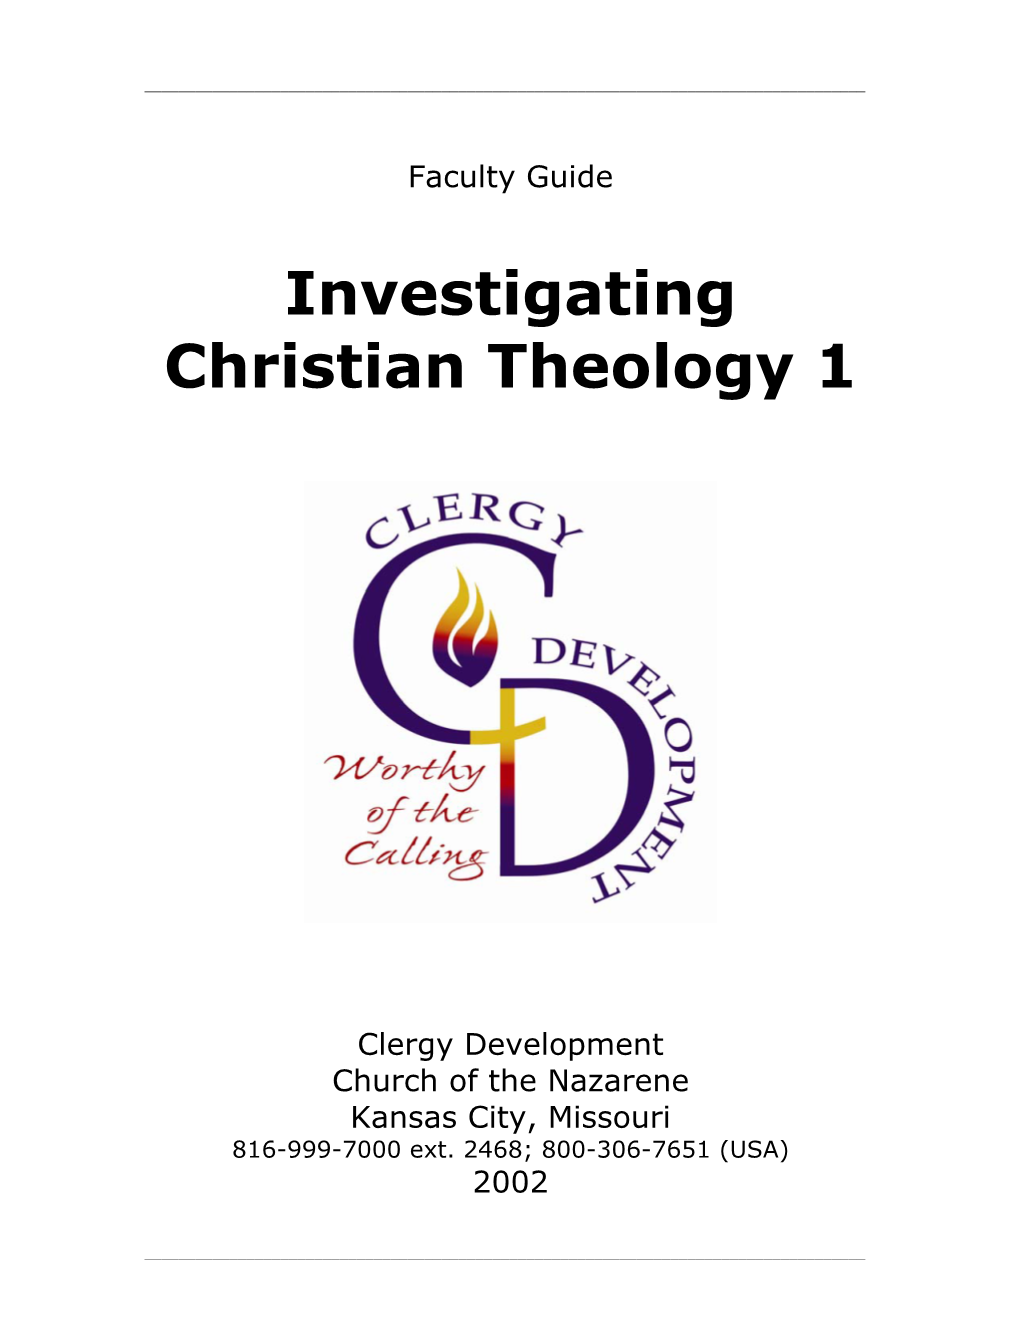 Investigating Christian Theology 1